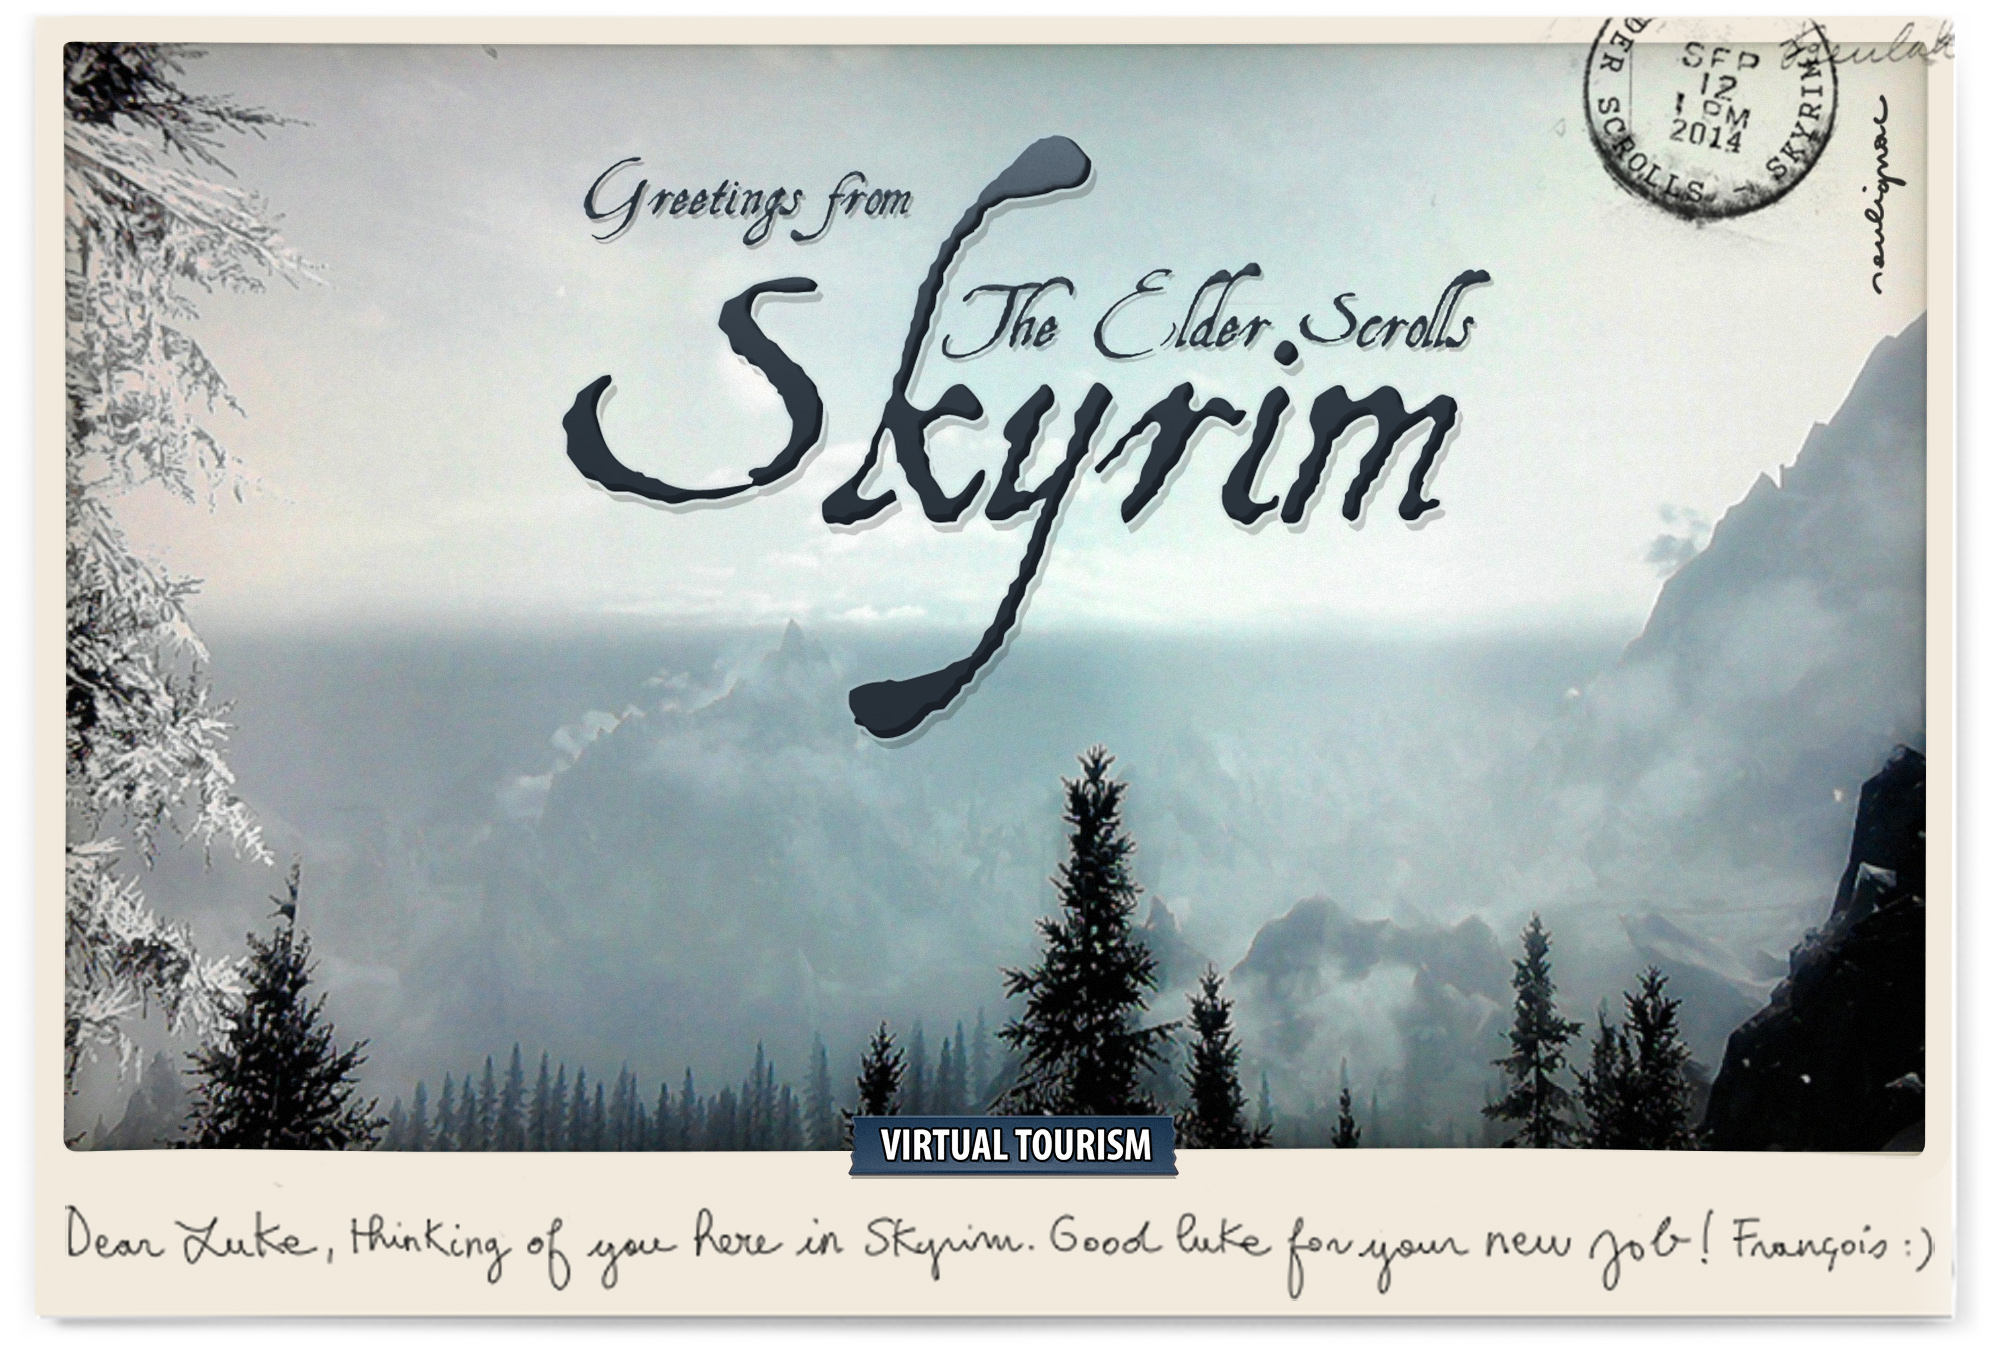 Postcards from Skyrim virtual worlds for LUKE THOMPSON - Francois Soulignac - Virtual Tourism, In-game photography - February 2014